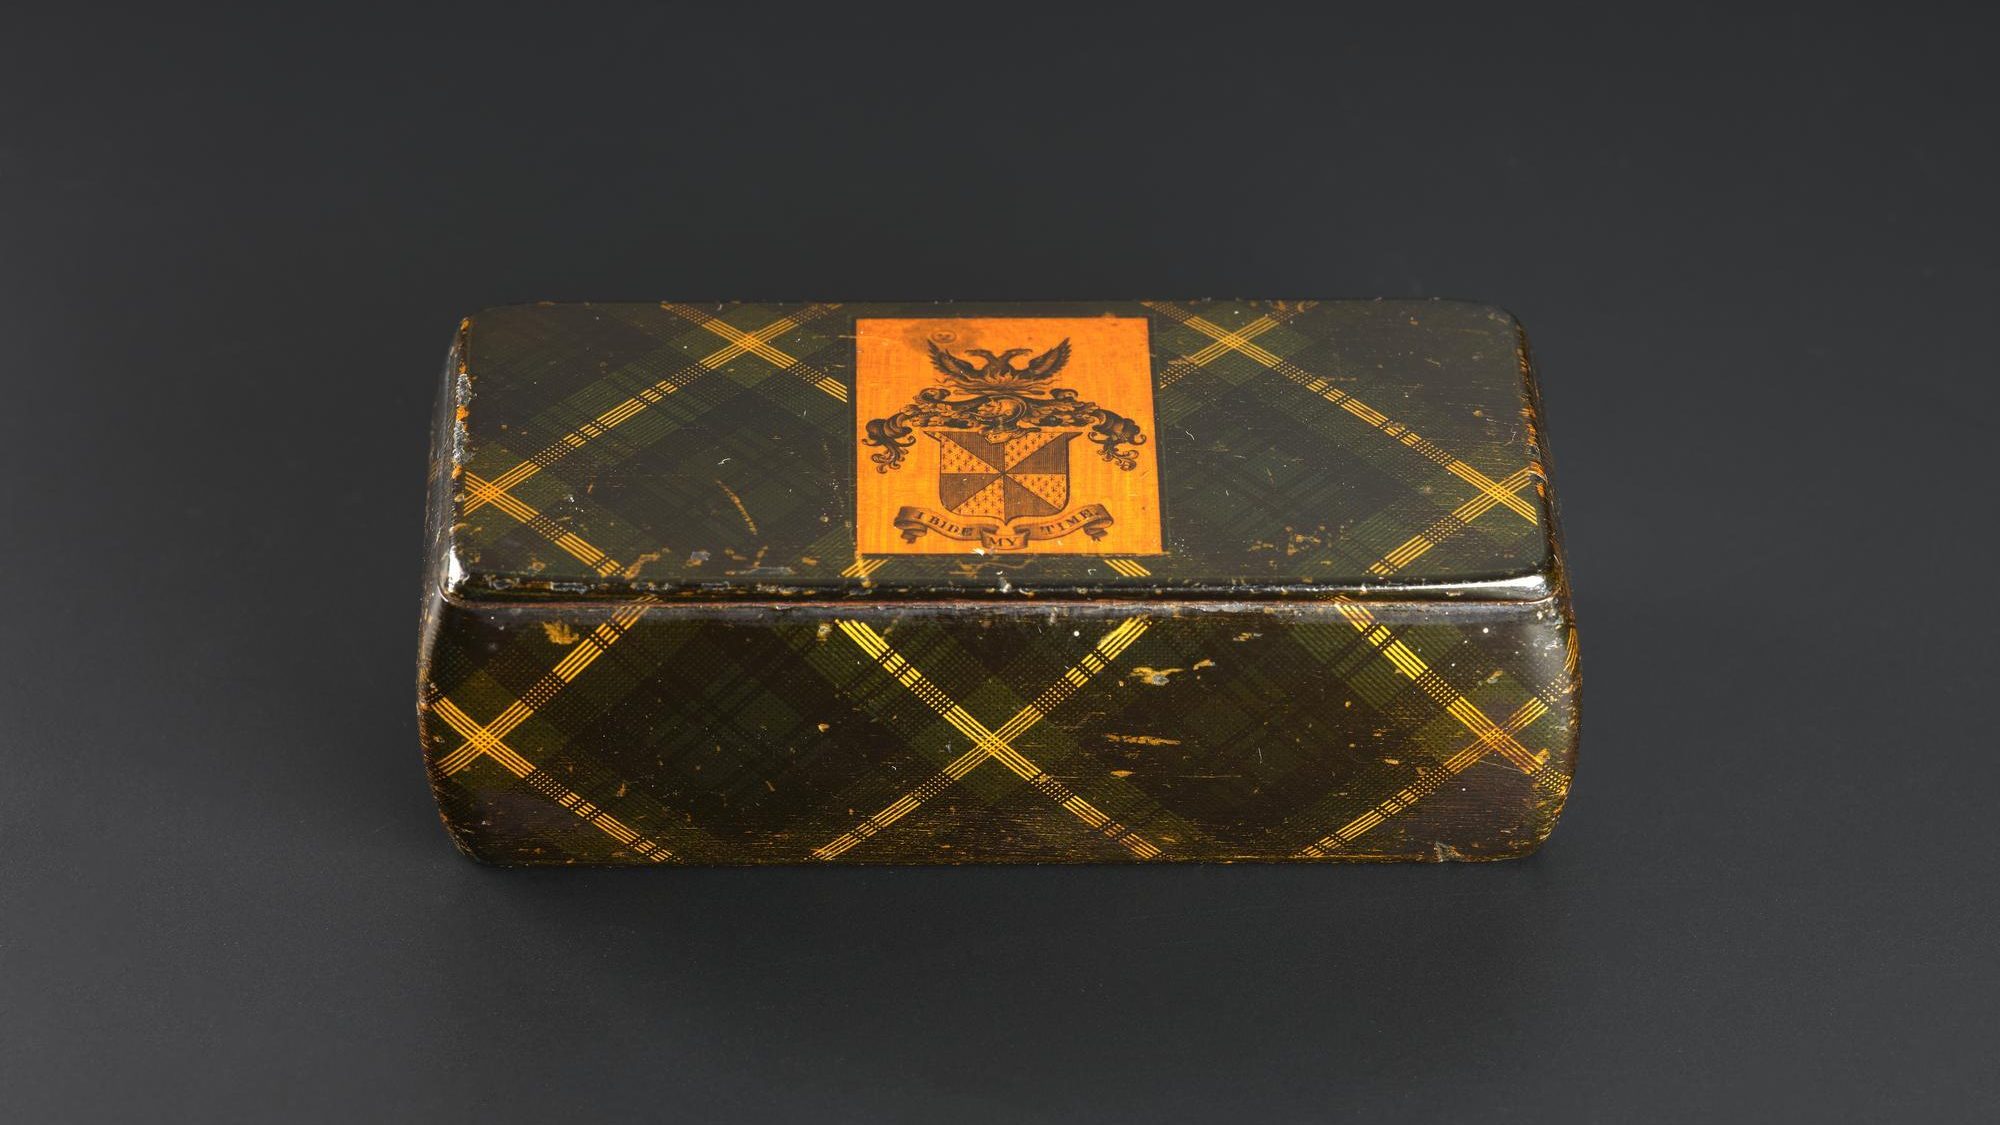 A small, rectangular snuffbox against a grey background. The snuffbox is covered in a green and yellow-striped tartan pattern, and has a yellow square with a black coat of arms in the centre of the lid.